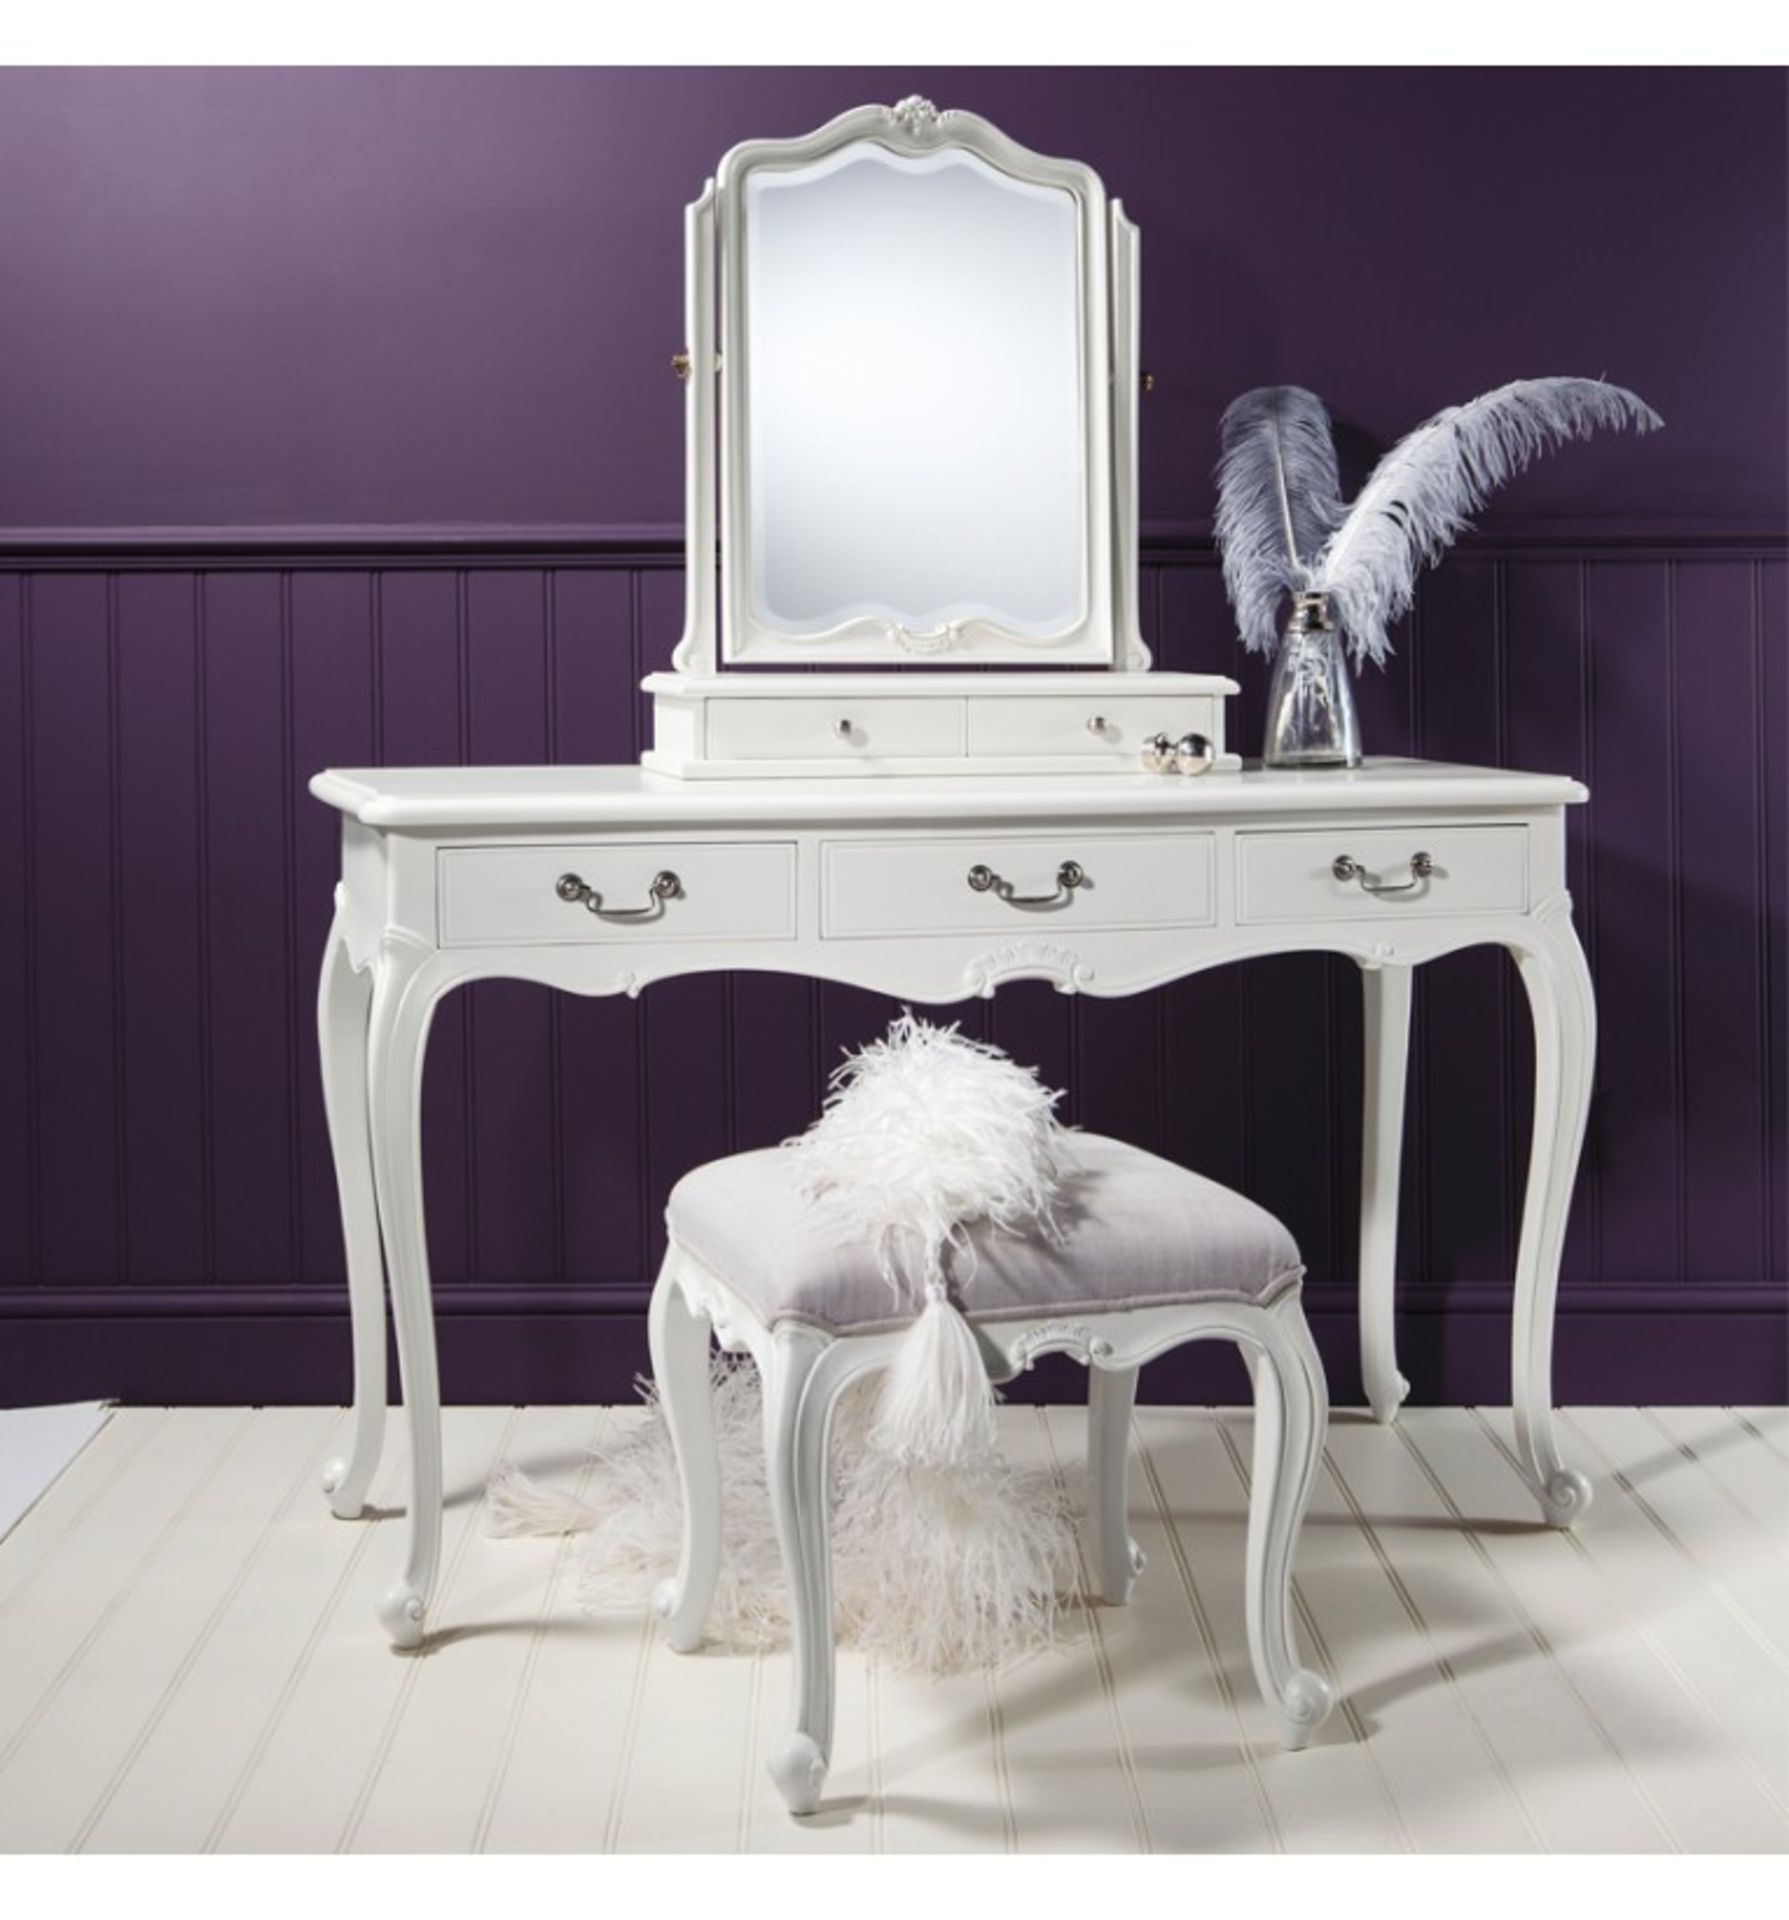 Laura Ashley Chic Dressing Table Vanilla White Made From Mindy Ash And Features Three Practical